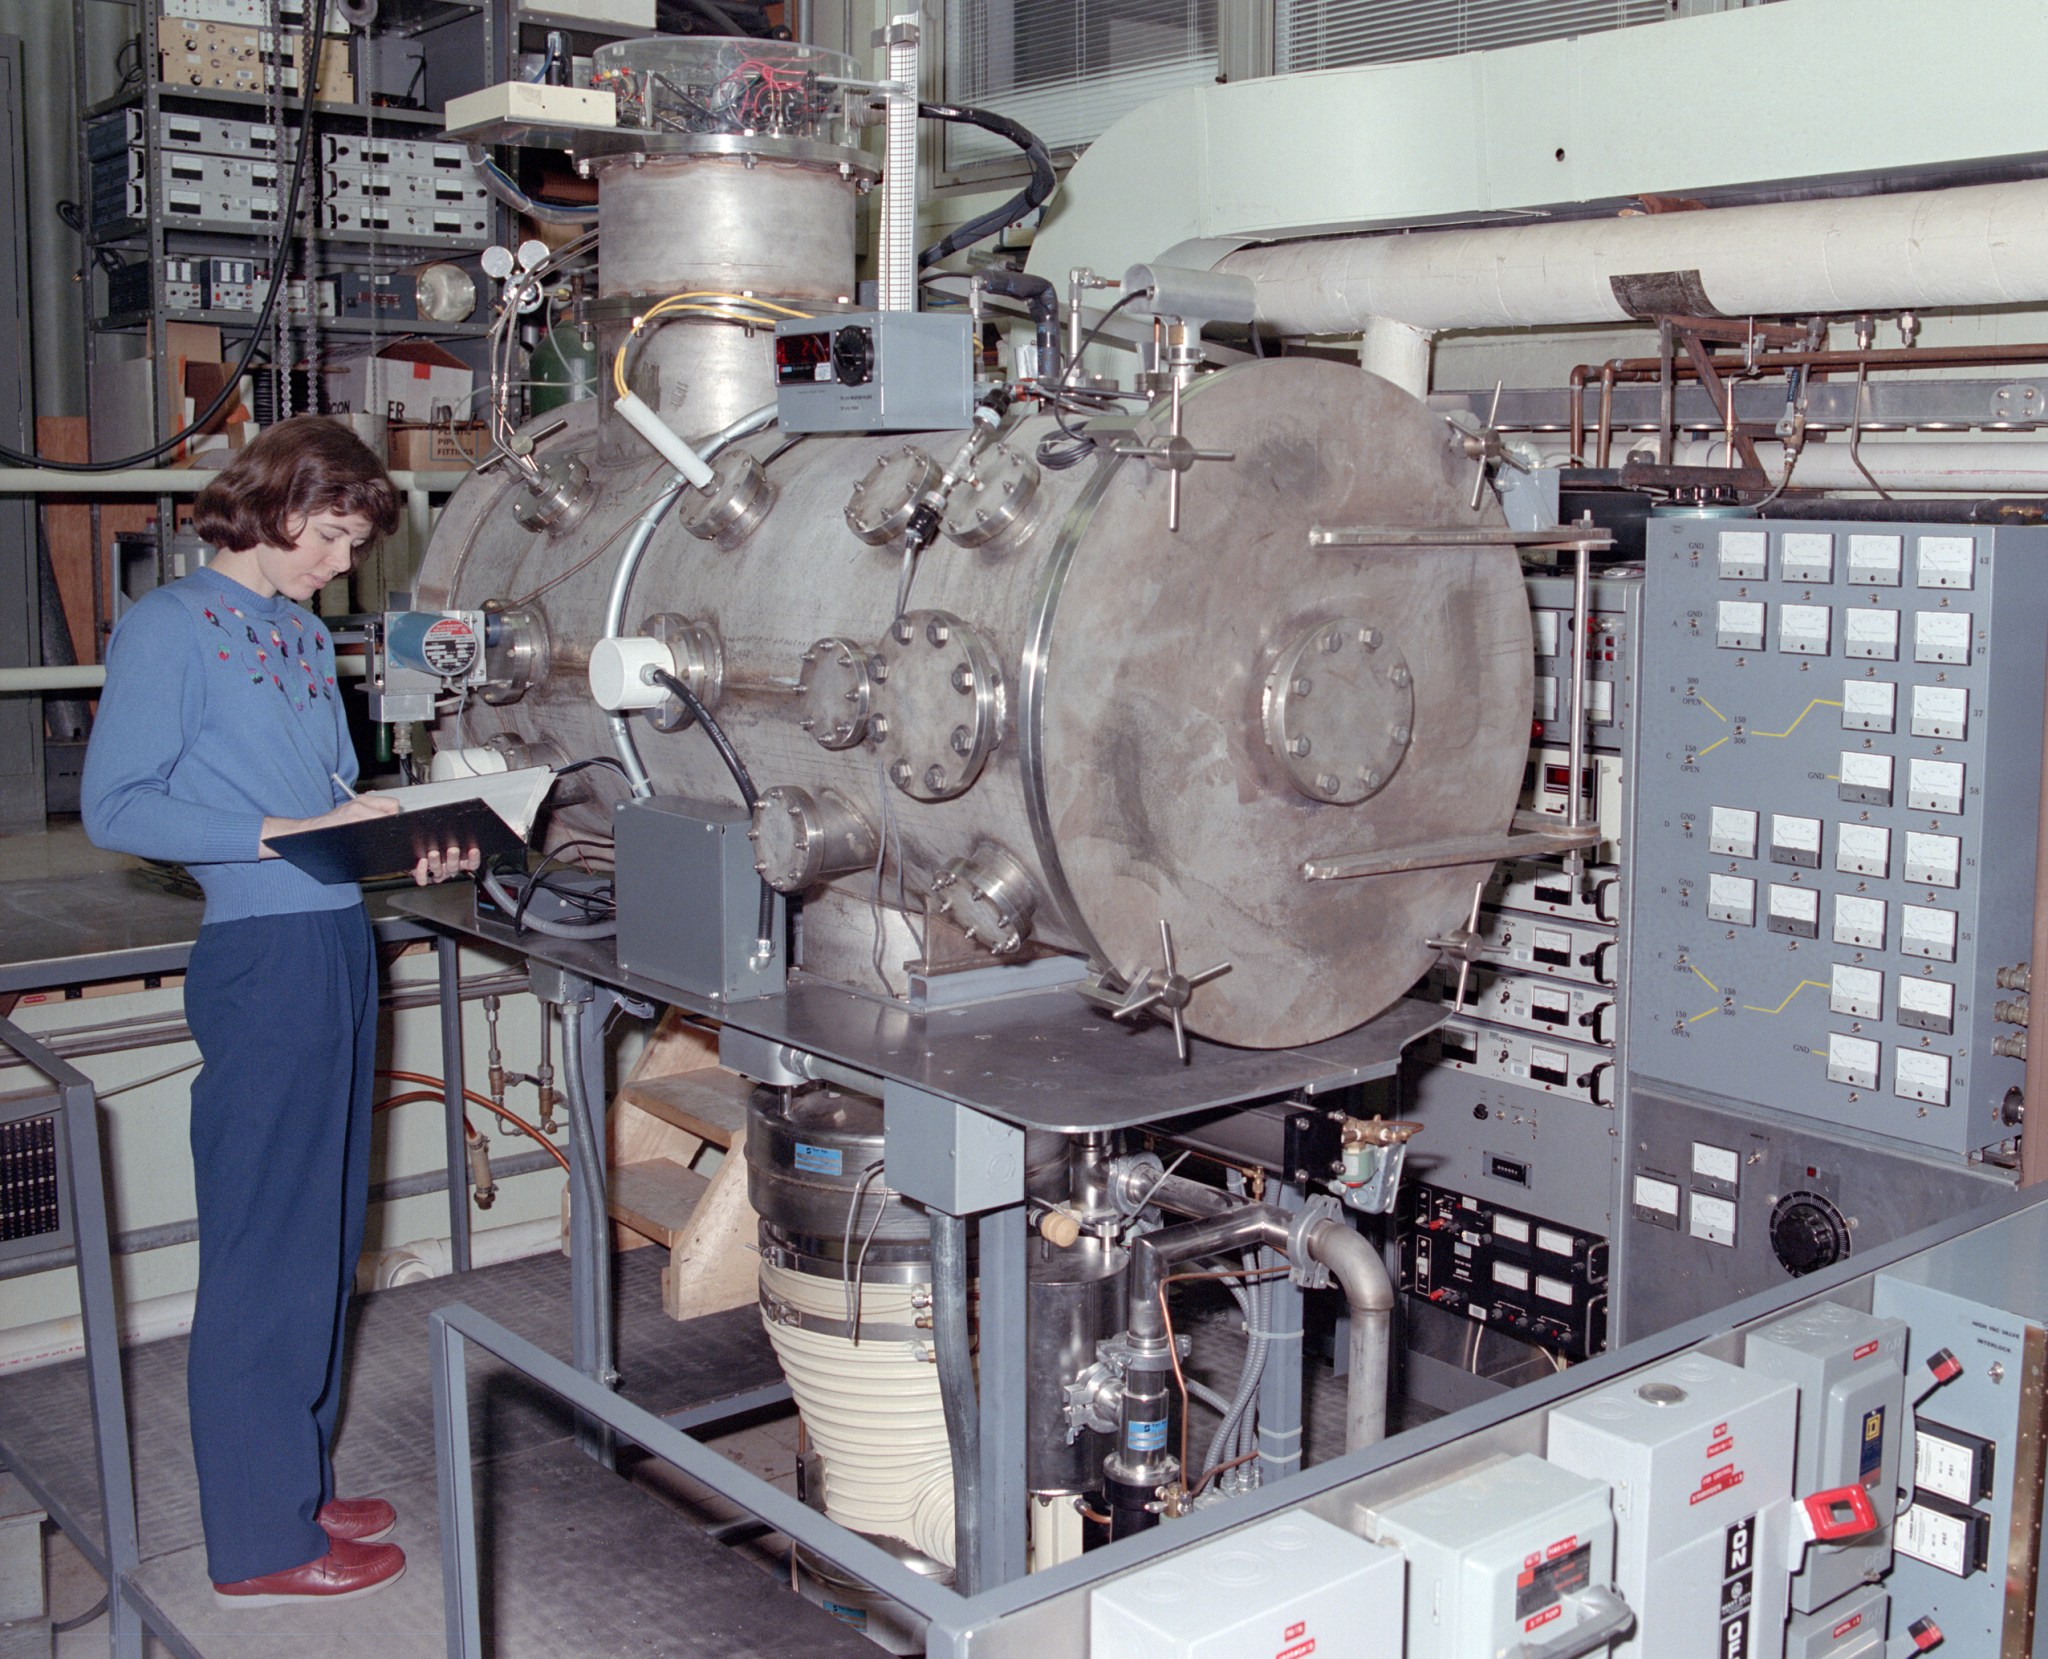 Researcher monitoring a test in a vacuum chamber.